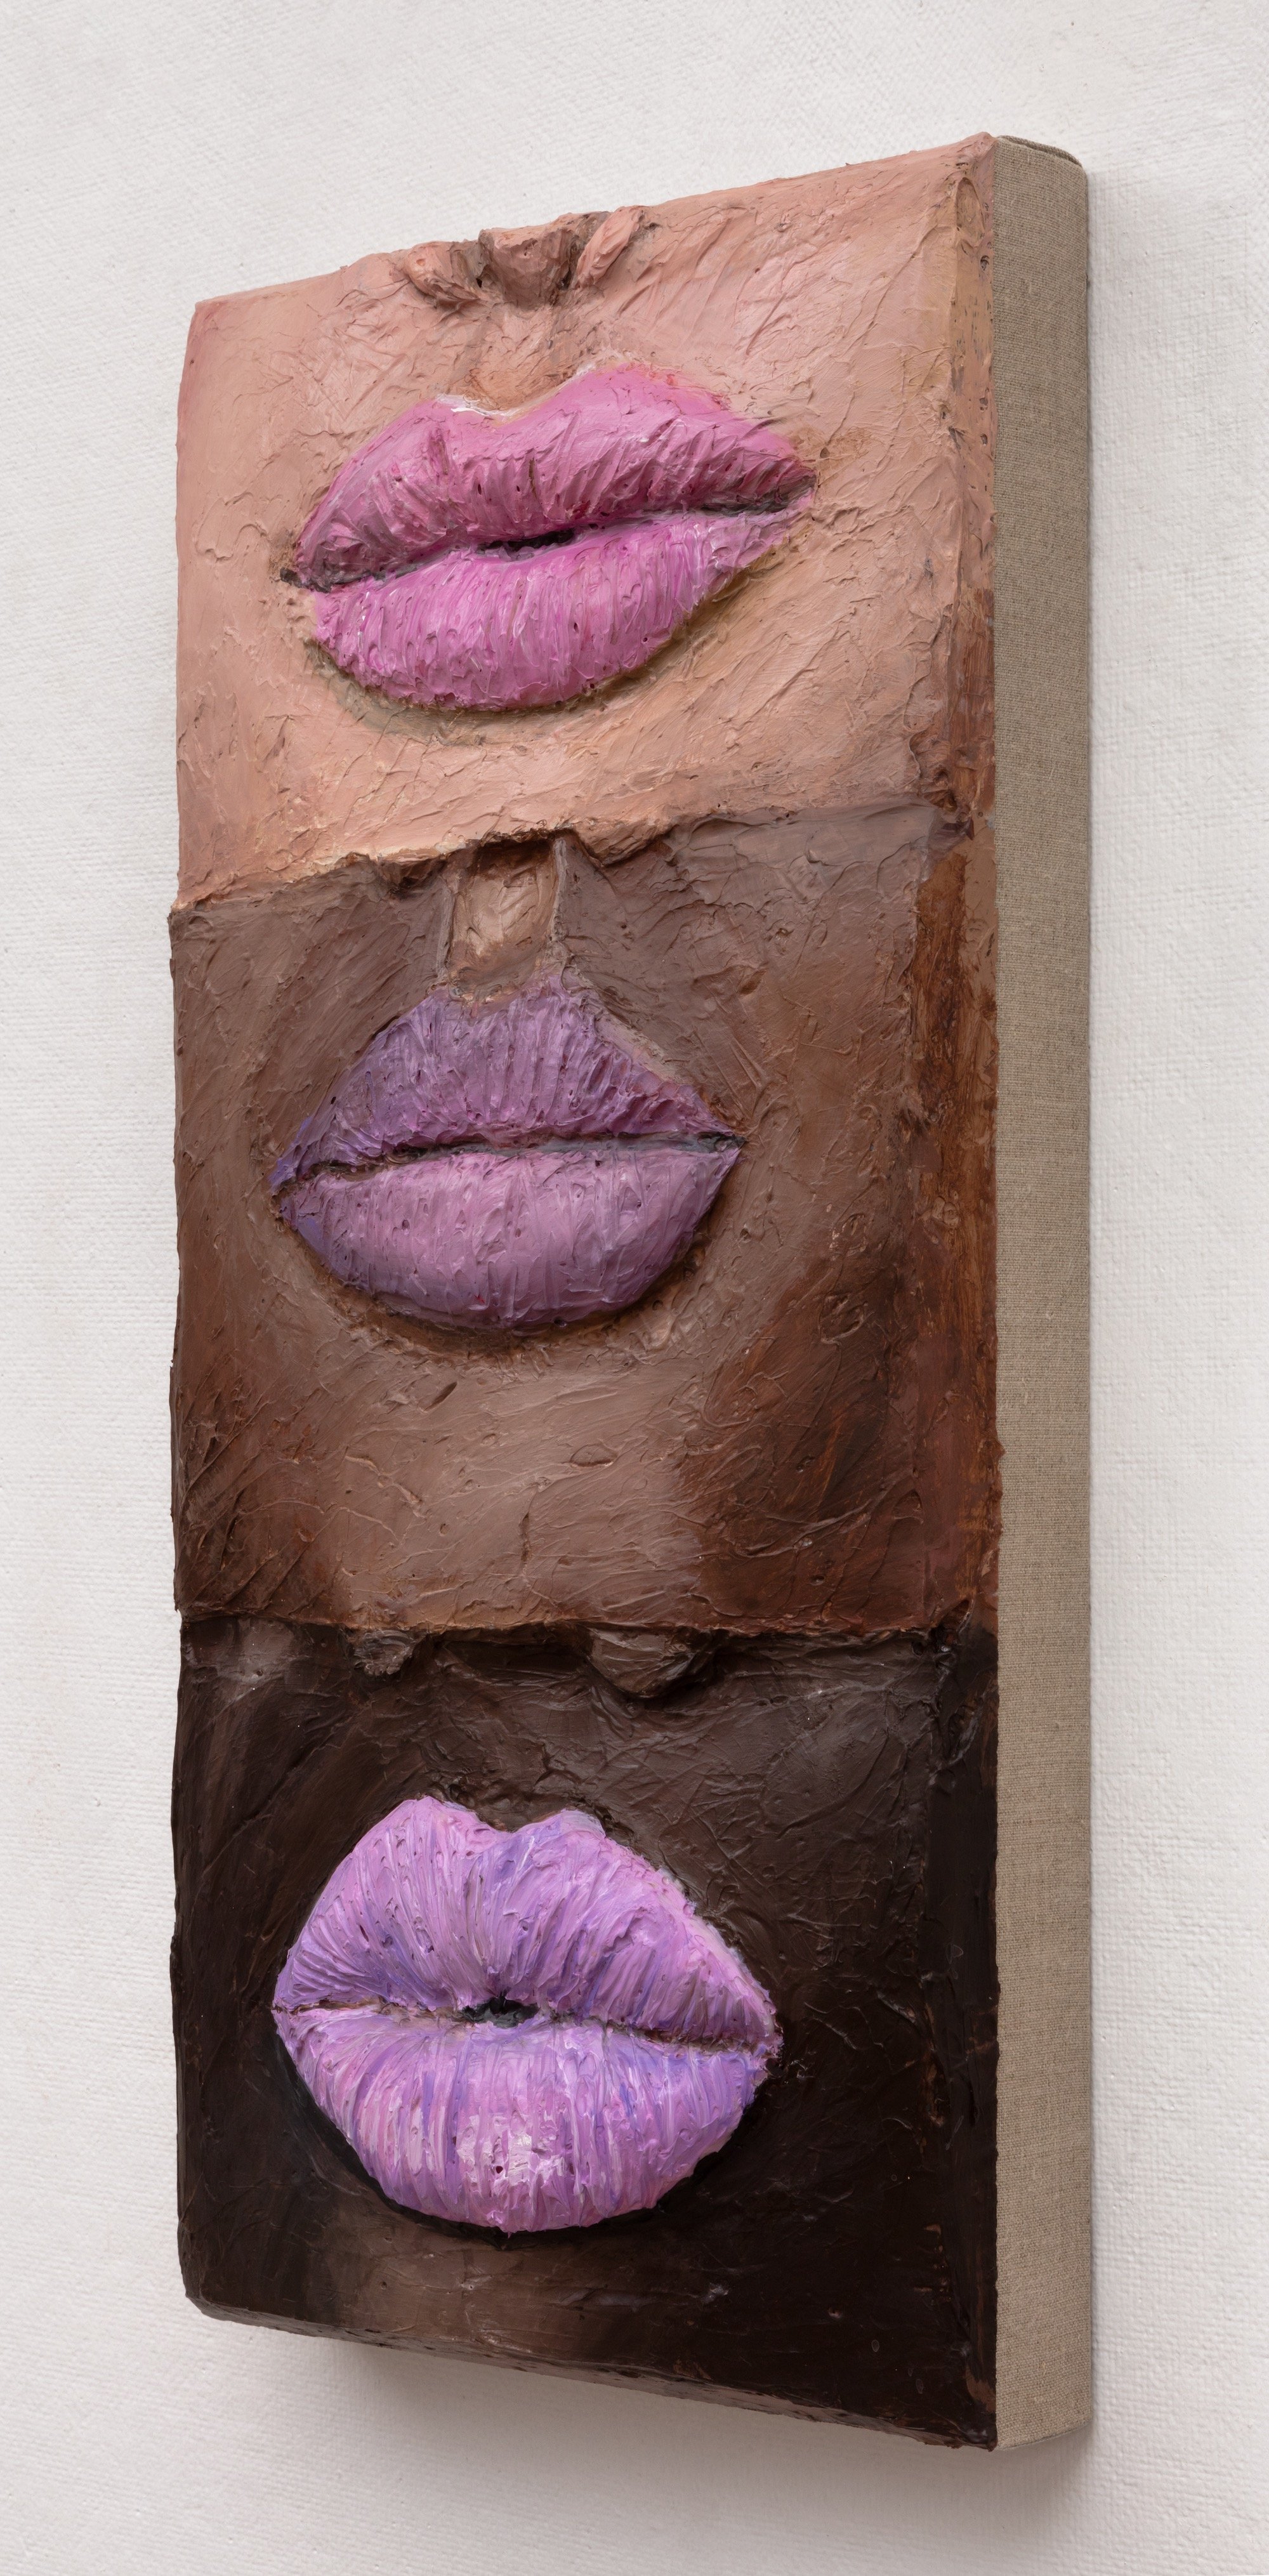 Gina Beavers Matte Pink Lipstick 24 x 12 inches Acrylic on linen on panel 2019 high res side view.jpeg